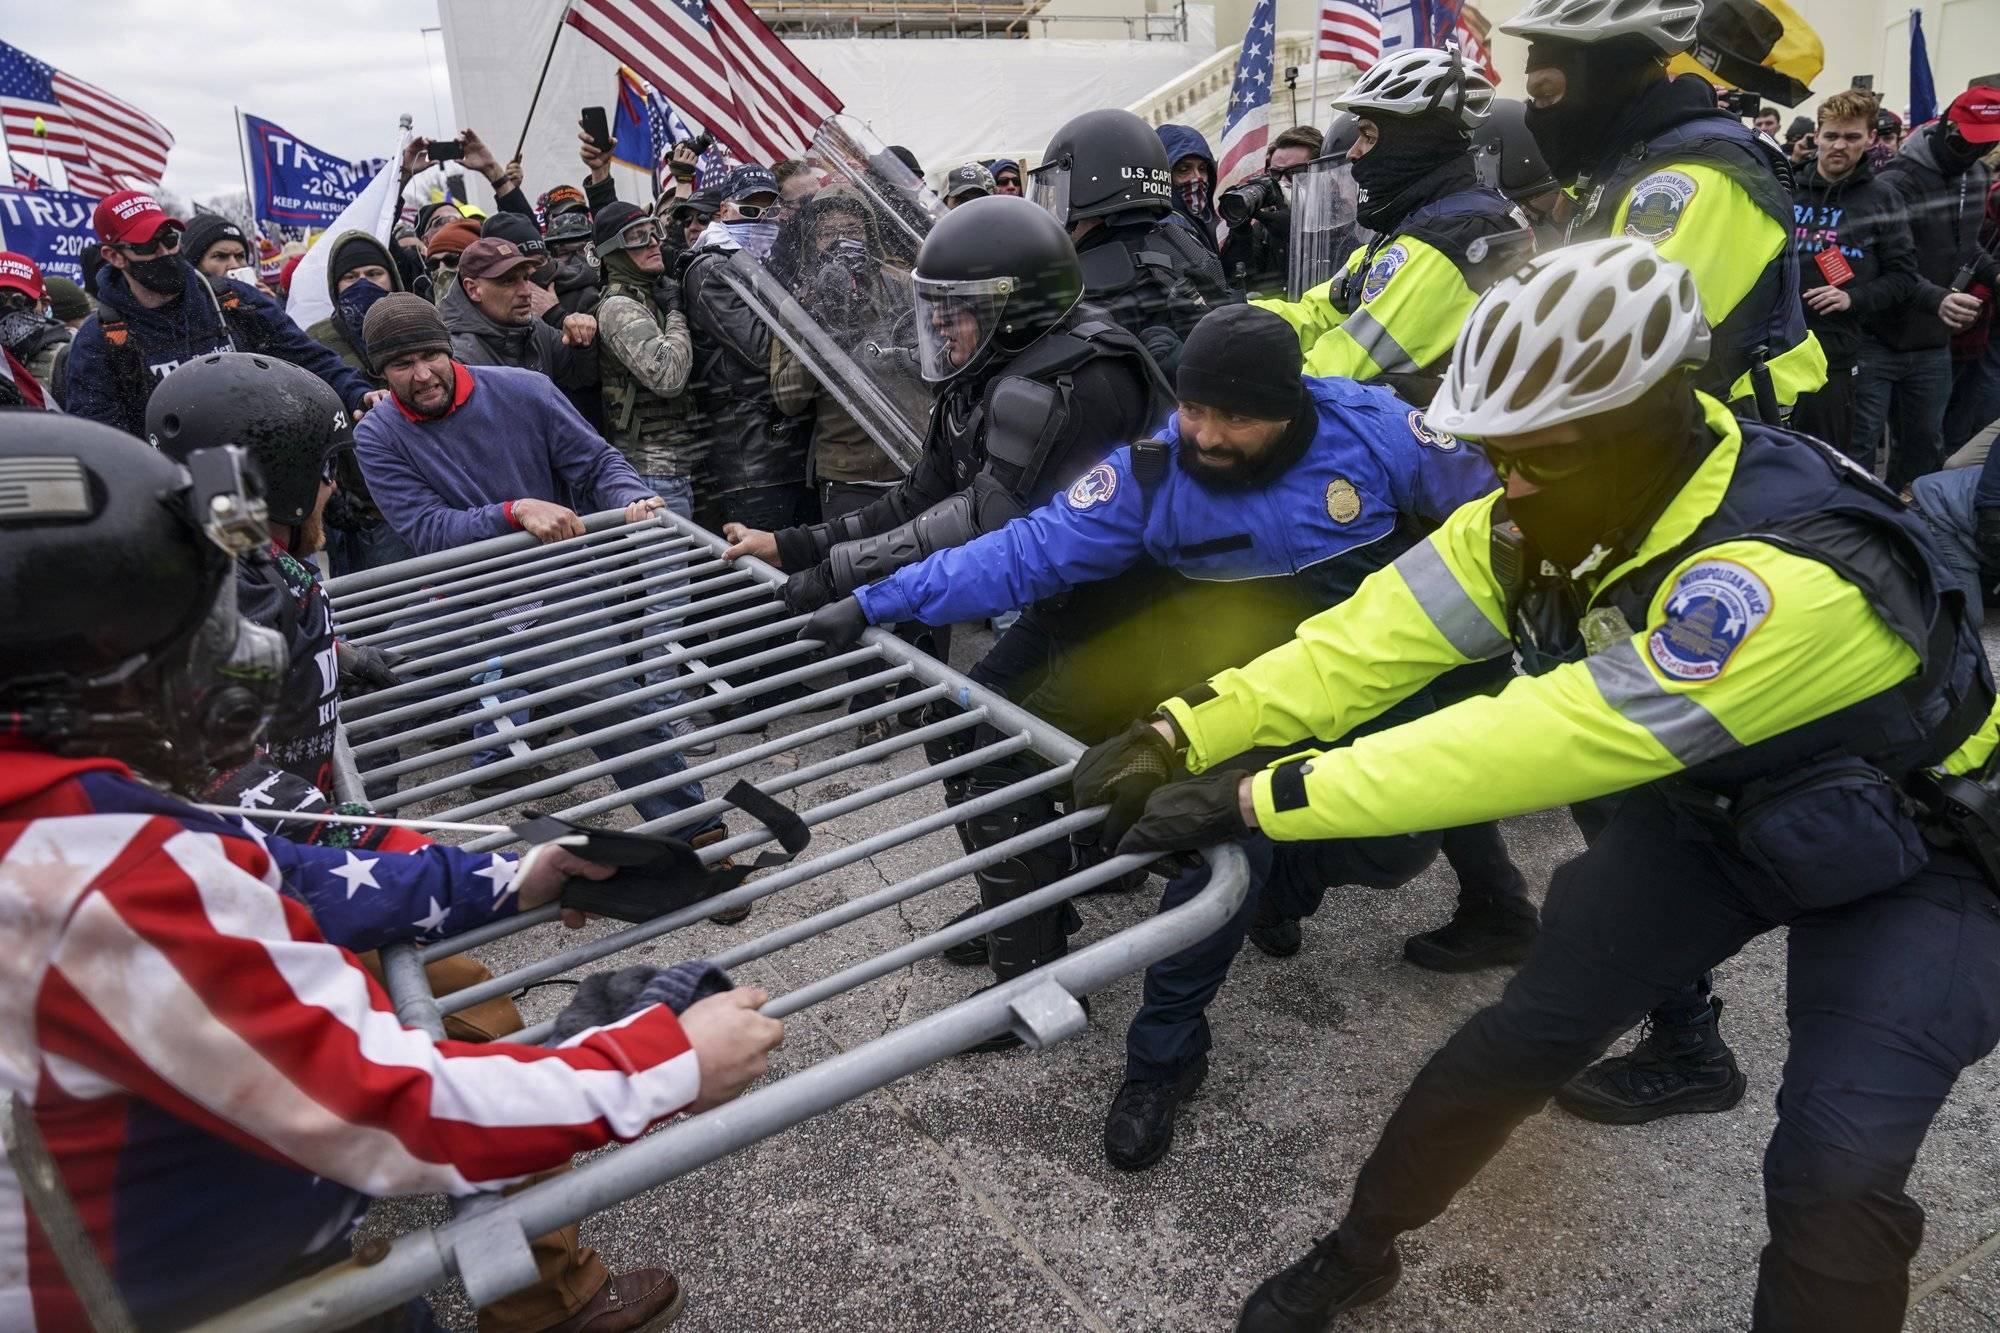 Trump supporters try to break through a police barrier, Wednesday, Jan. 6, 2021, at the Capitol in Washington. (AP Photo/John Minchillo)